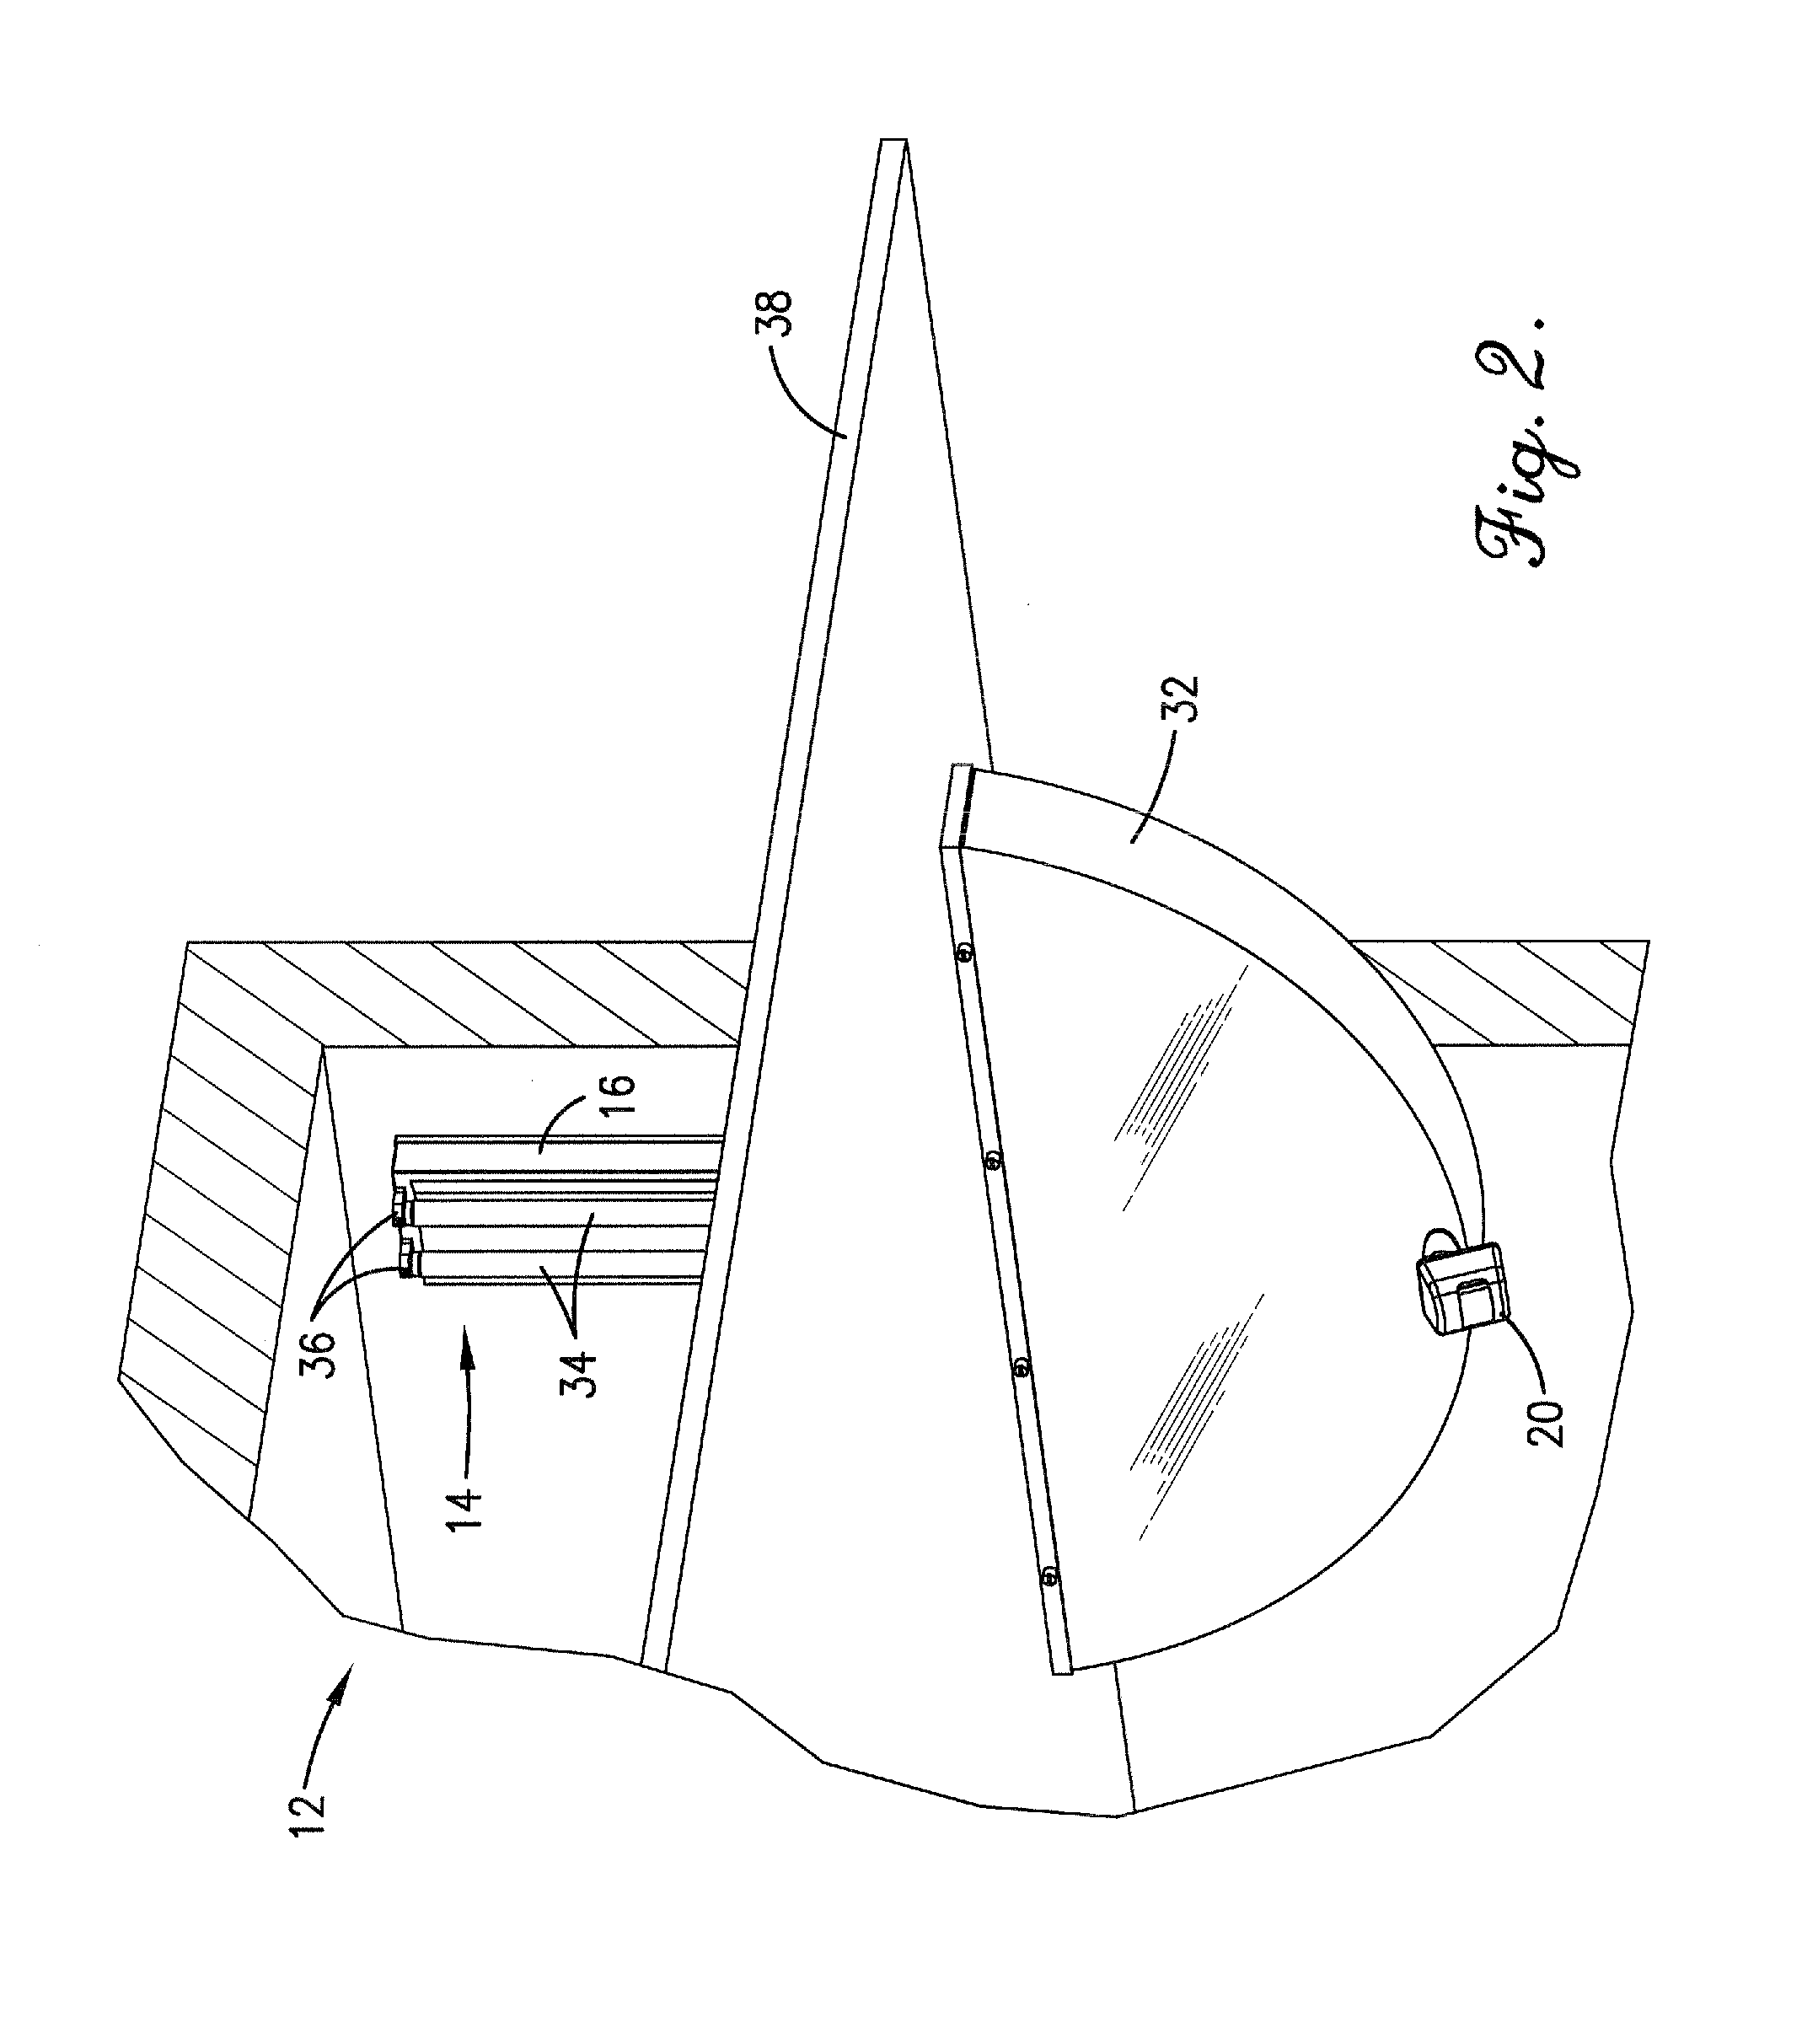 System and method for germicidal sanitizing of an elevator or other enclosed structure